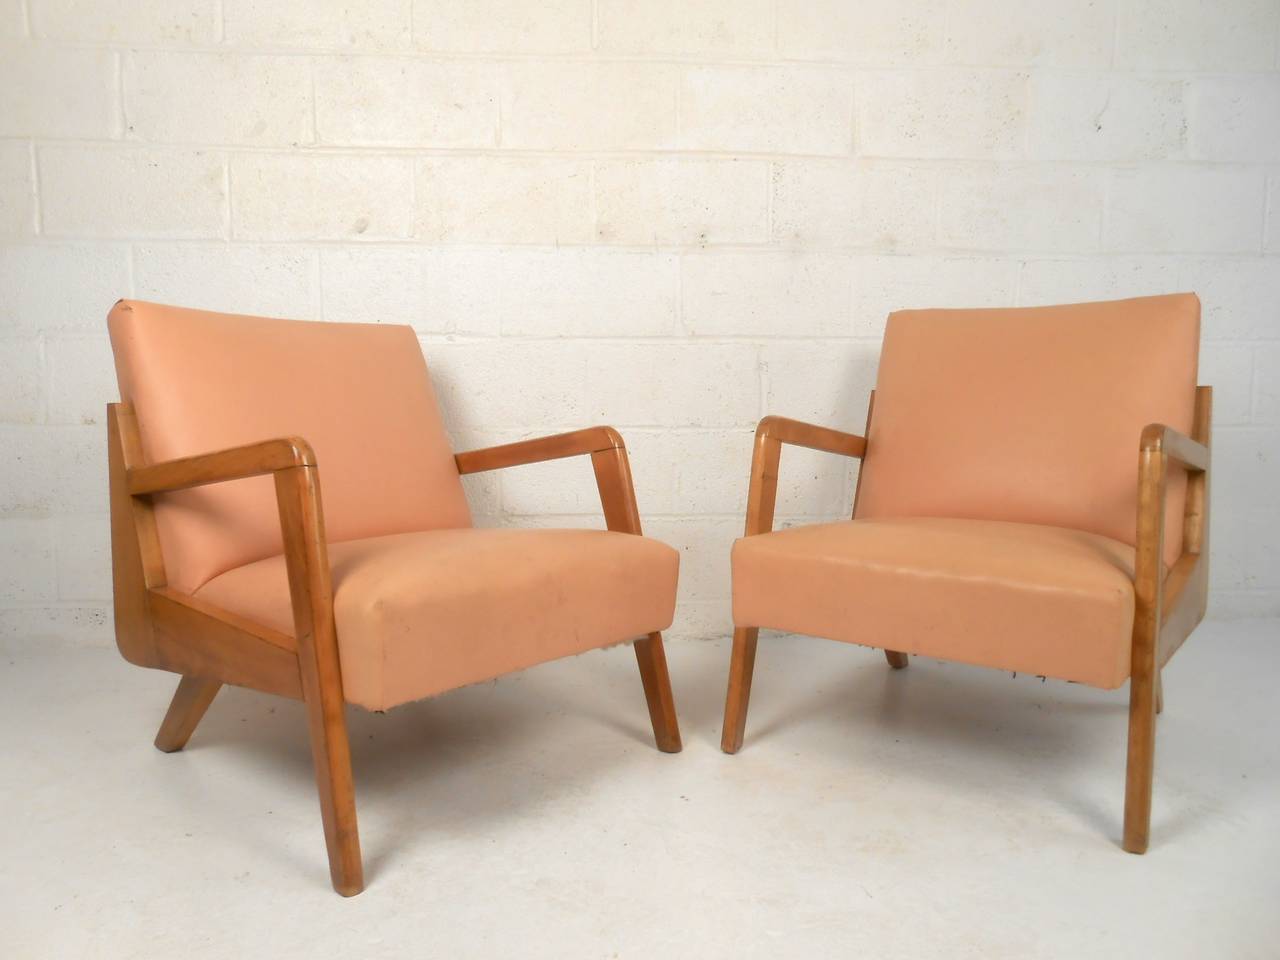 Stunning Mid-Century Modern armchairs with tapered legs and vinyl seats. Brass nailheads trim the back accentuate the vintage atomic design of the shapely seat frames. Ideal lounge chairs for home living room or business lounge area. 

(Please